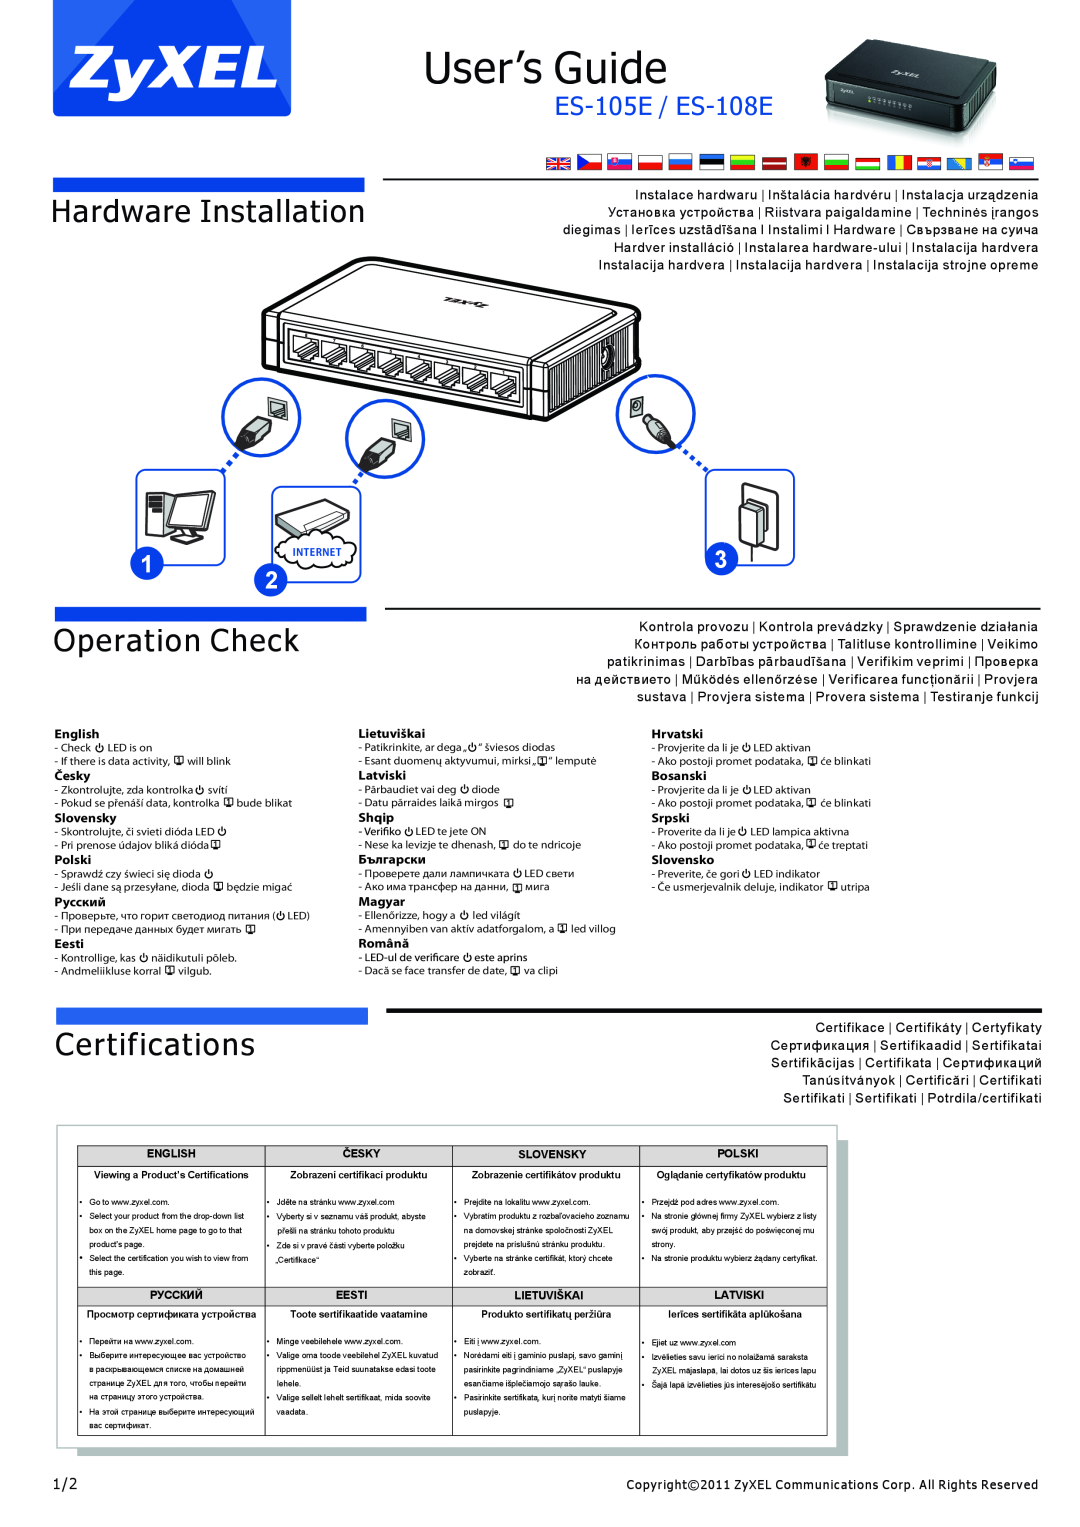 ZyXEL Communications es-105e manual User’s Guide, Hardware Installation, Operation Check, Certifications 